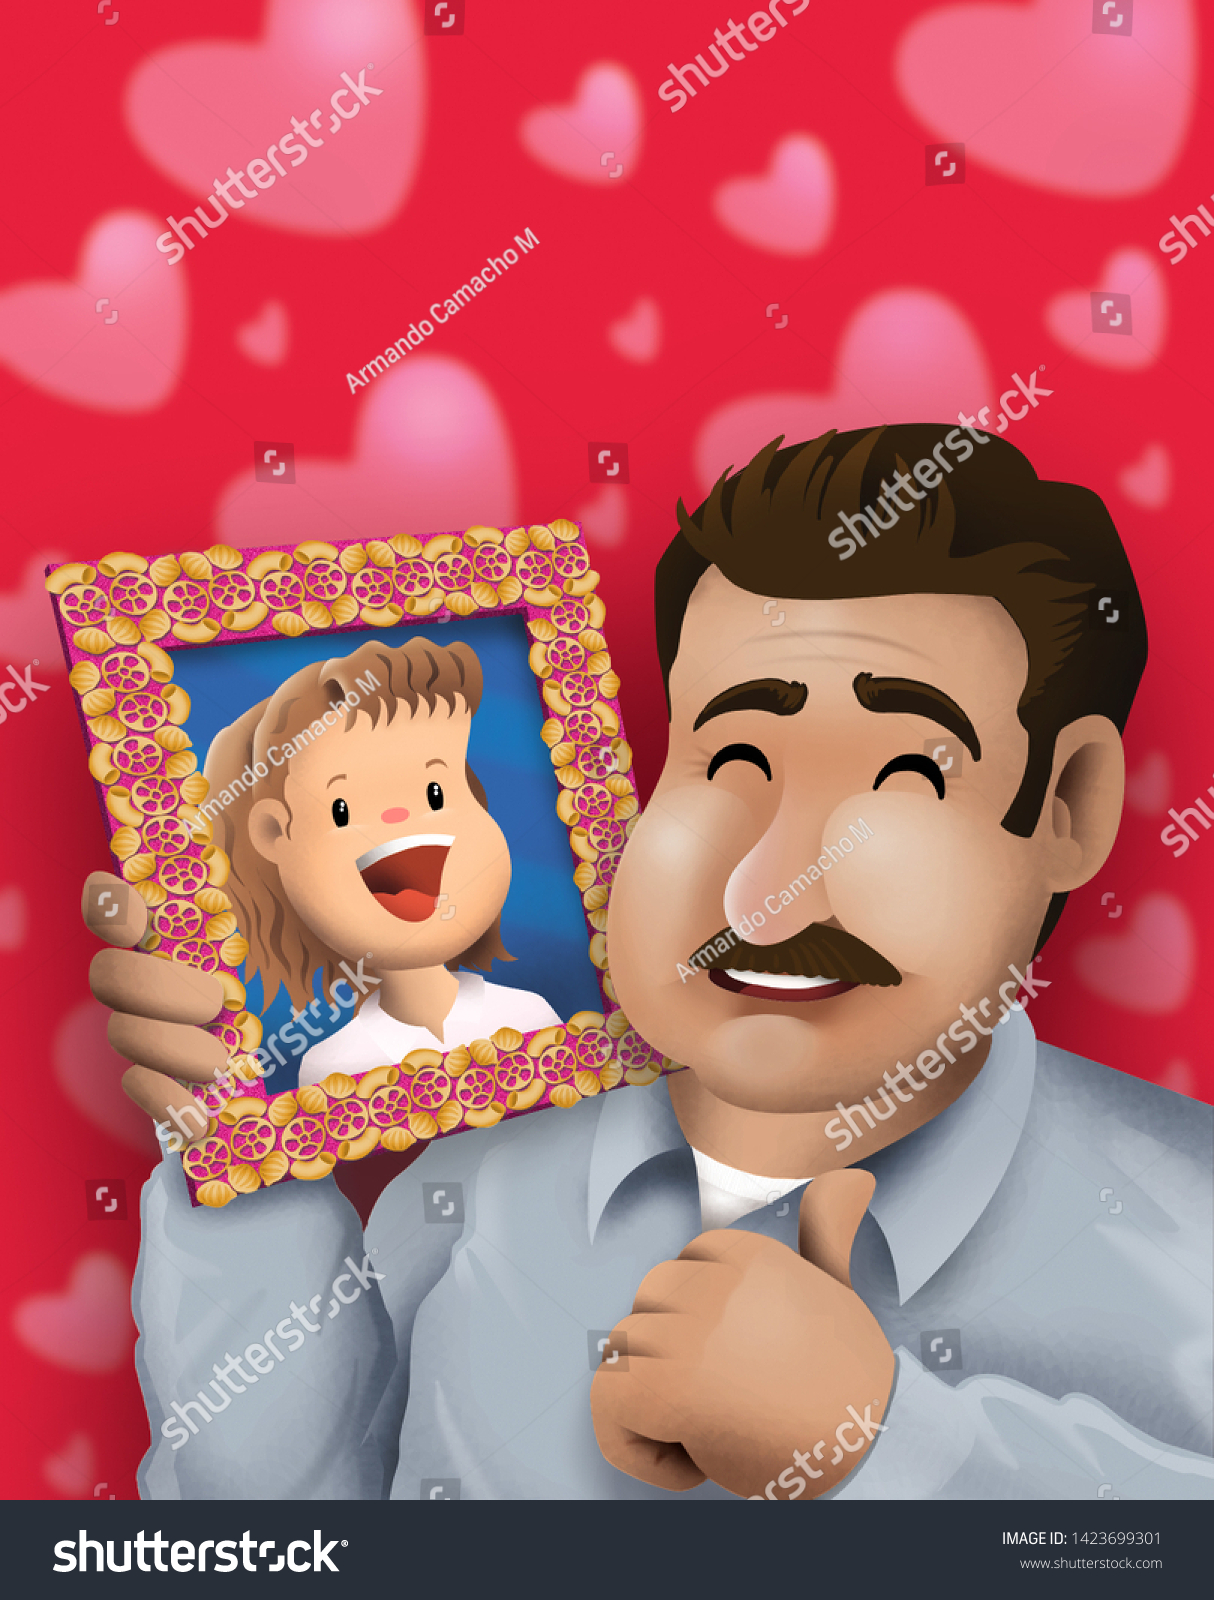 Proud Dad Holding His Daughters Portrait Stock Illustration 1423699301 Shutterstock